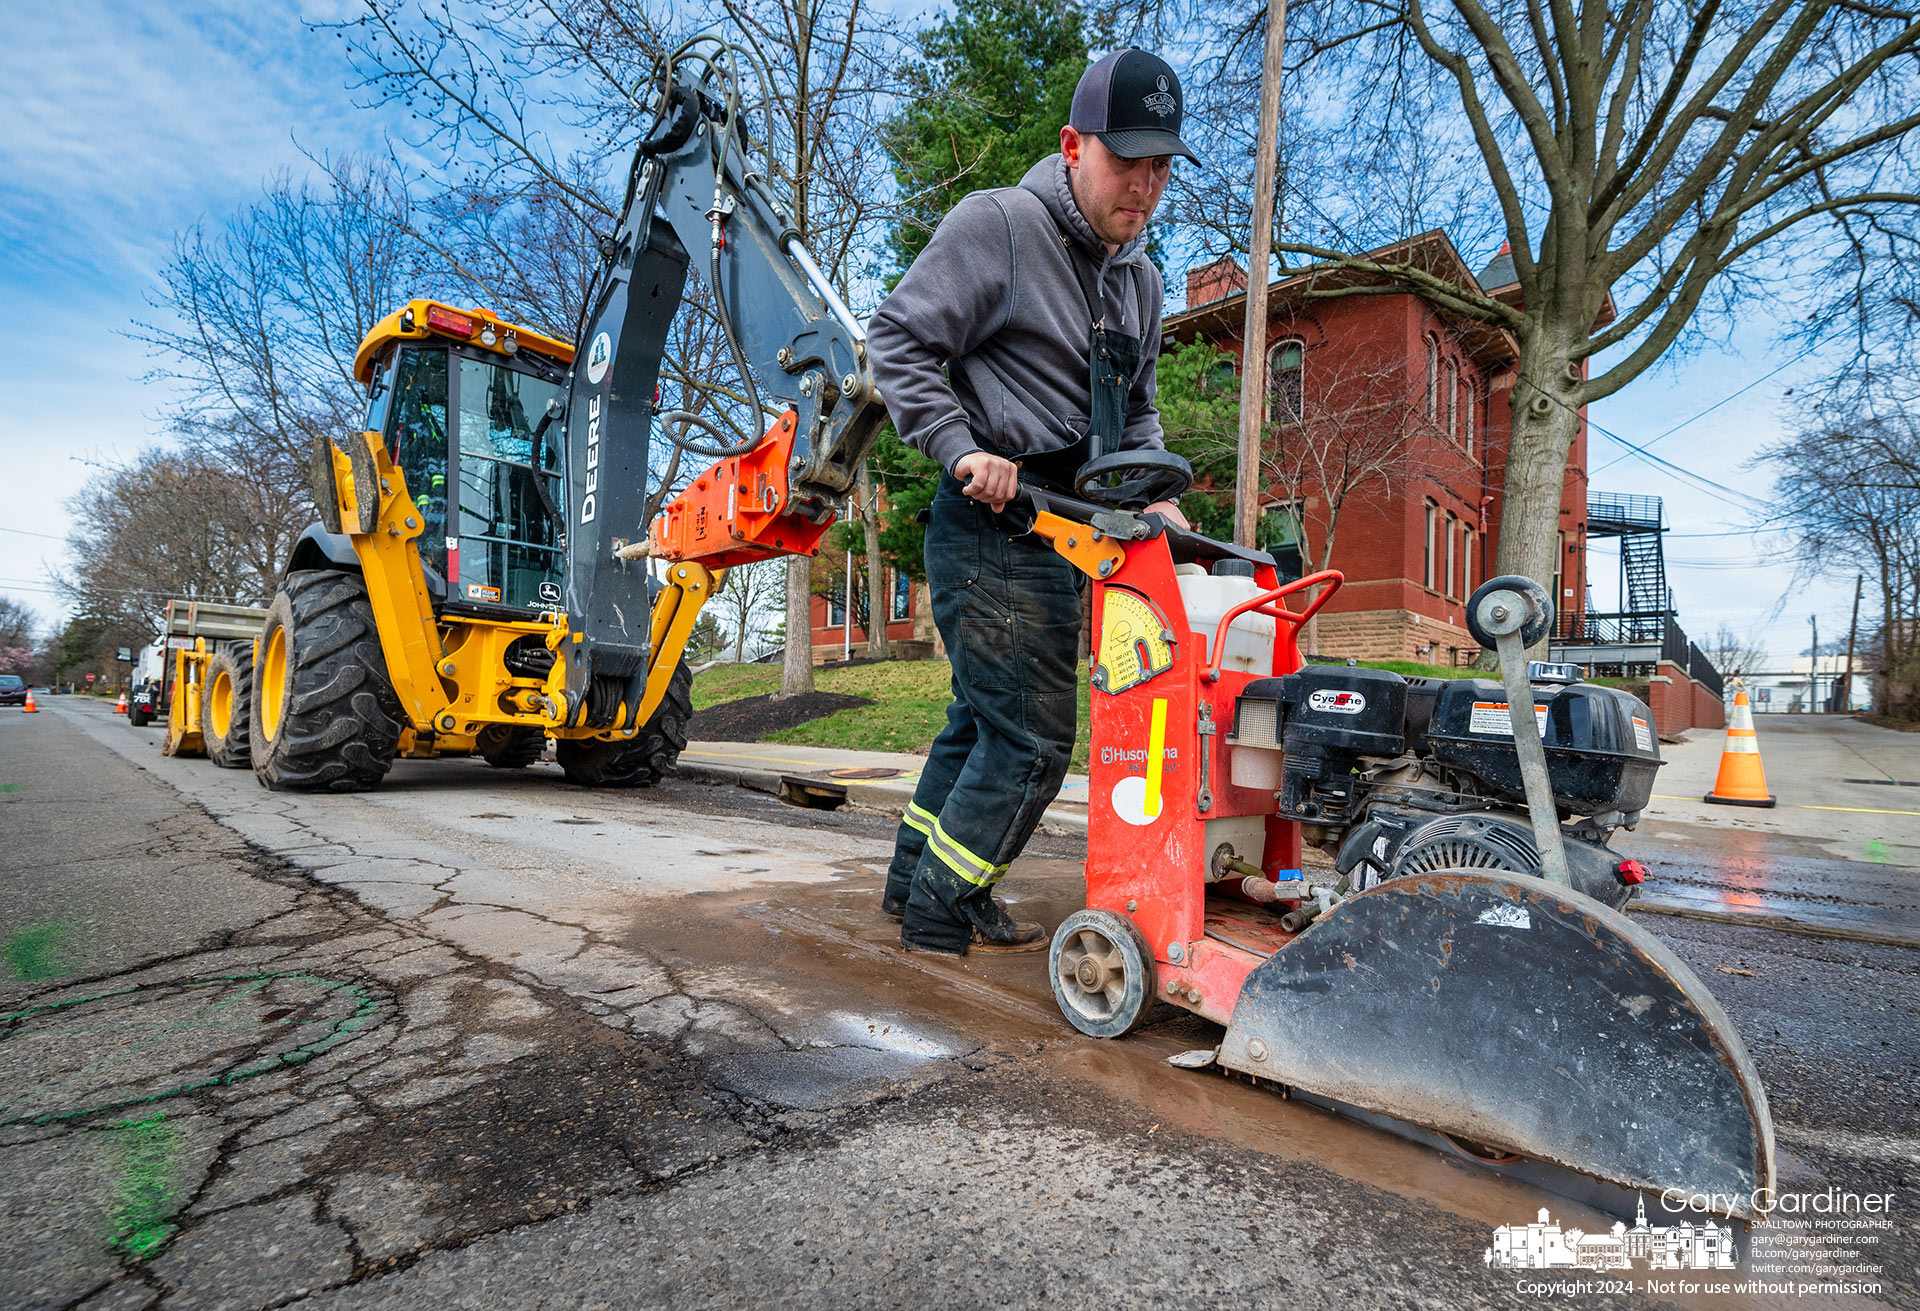 After the school closed Tuesday, a section of the street in front of Emerson Elementary was removed to make water pipe repairs. The leak was discovered just before school began but repairs were delayed so as not to disrupt student drop-off and pickup. My Final Photo for March 19, 2024.